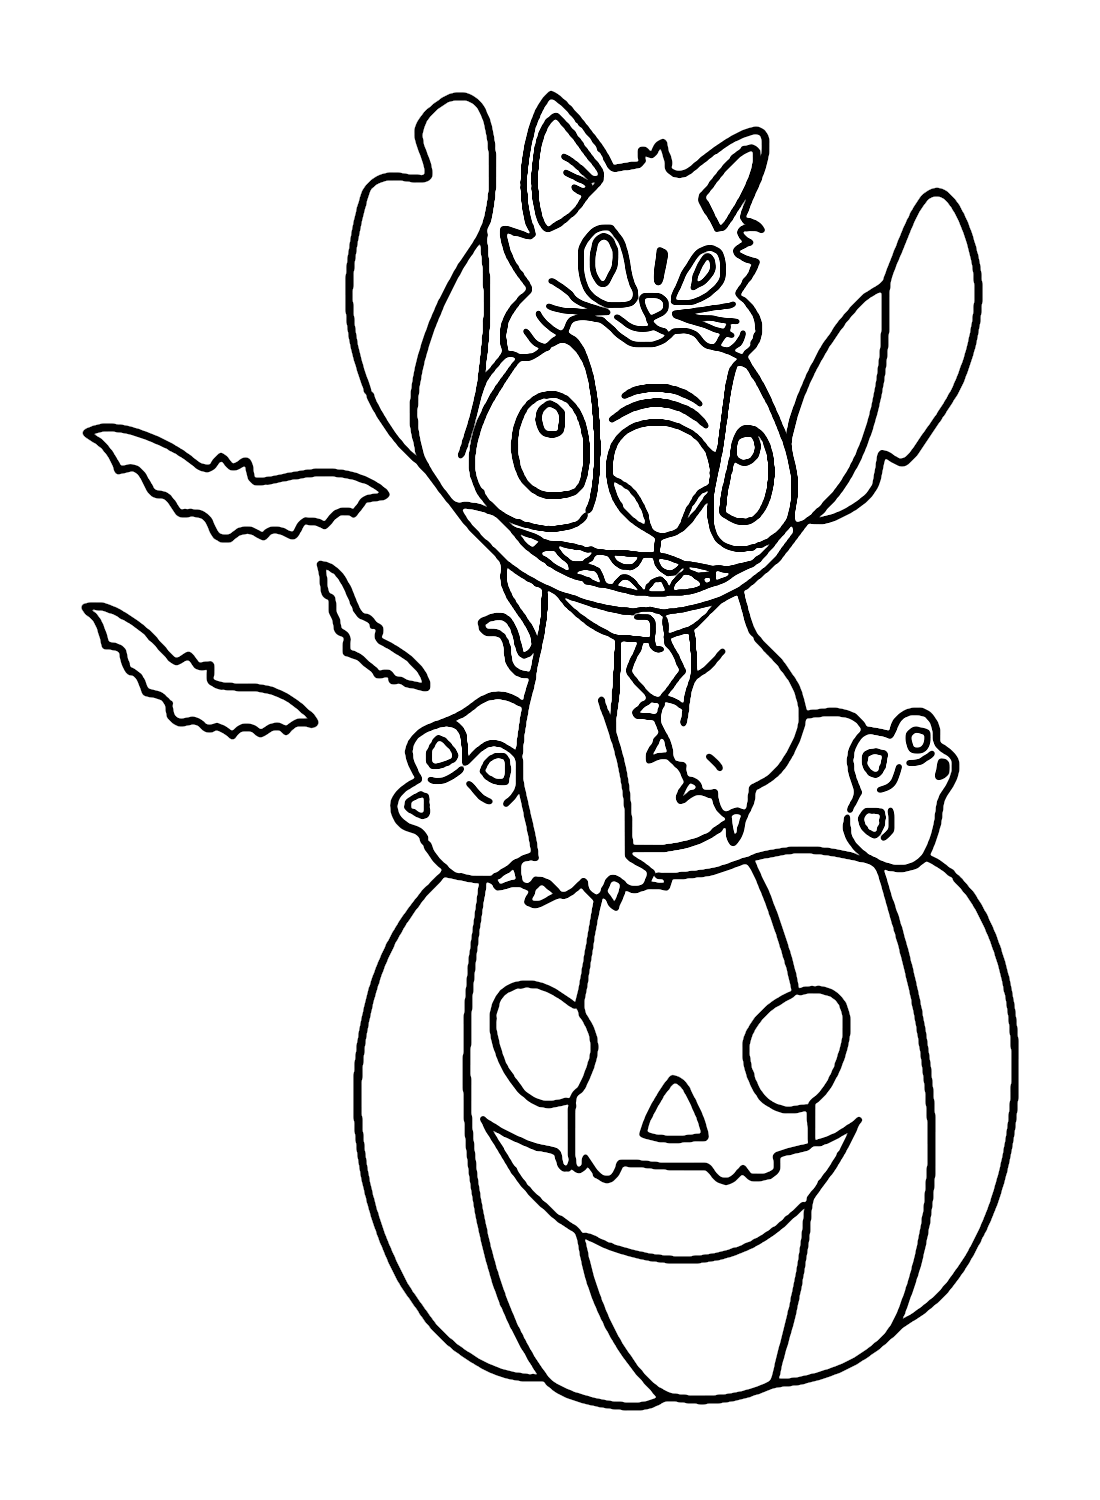 Halloween Stitch Coloring Pages Coloring Pages - Free Printable Coloring  Pages